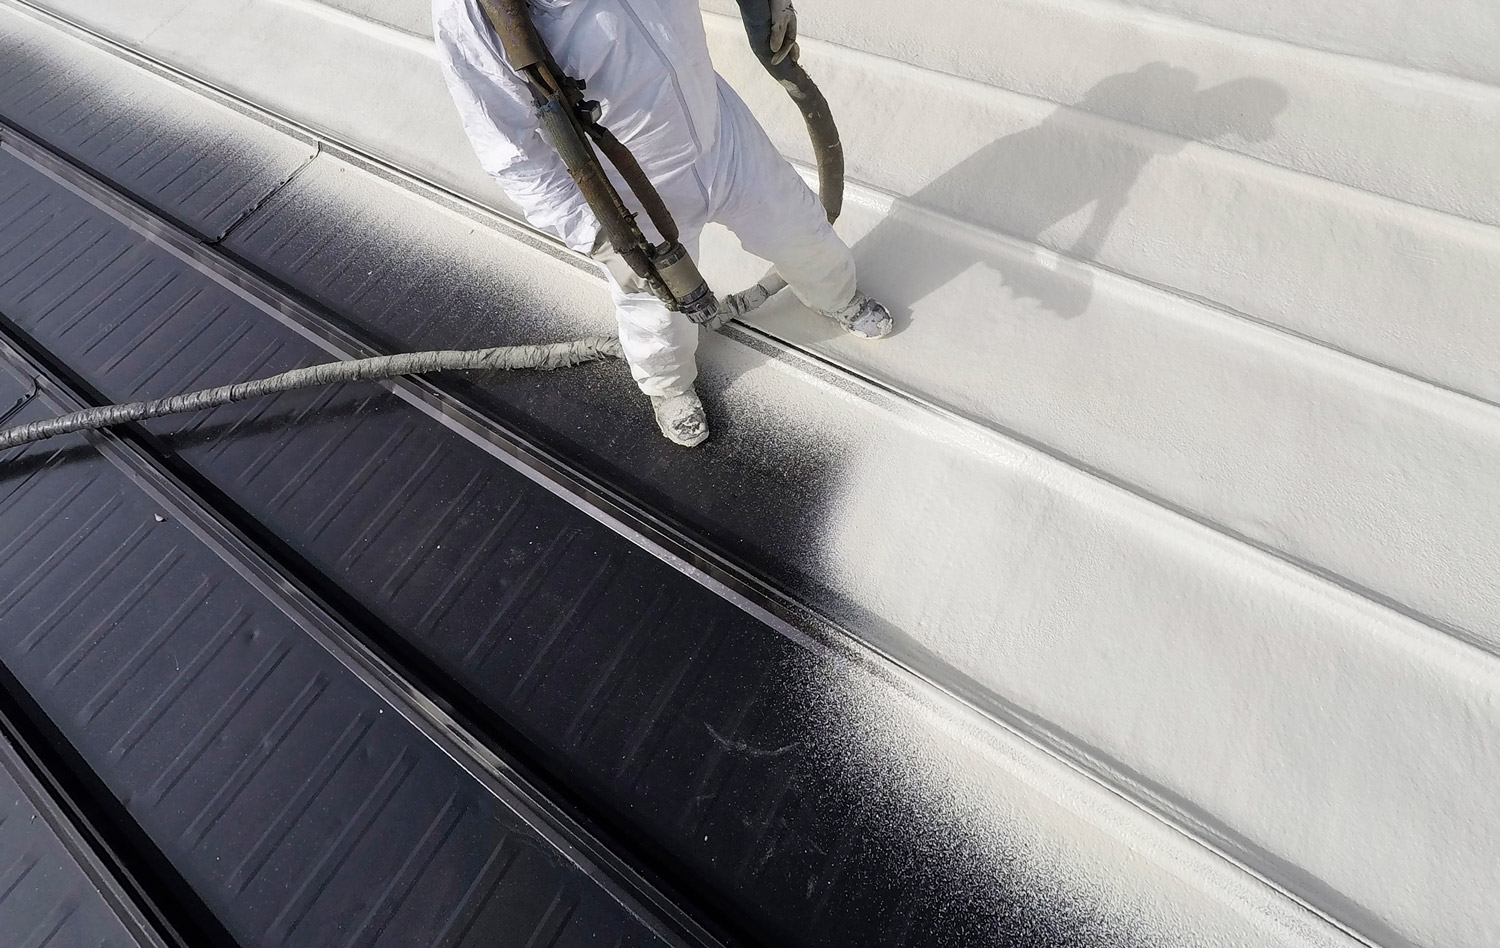 Accella Spraying spray foam roofing systems